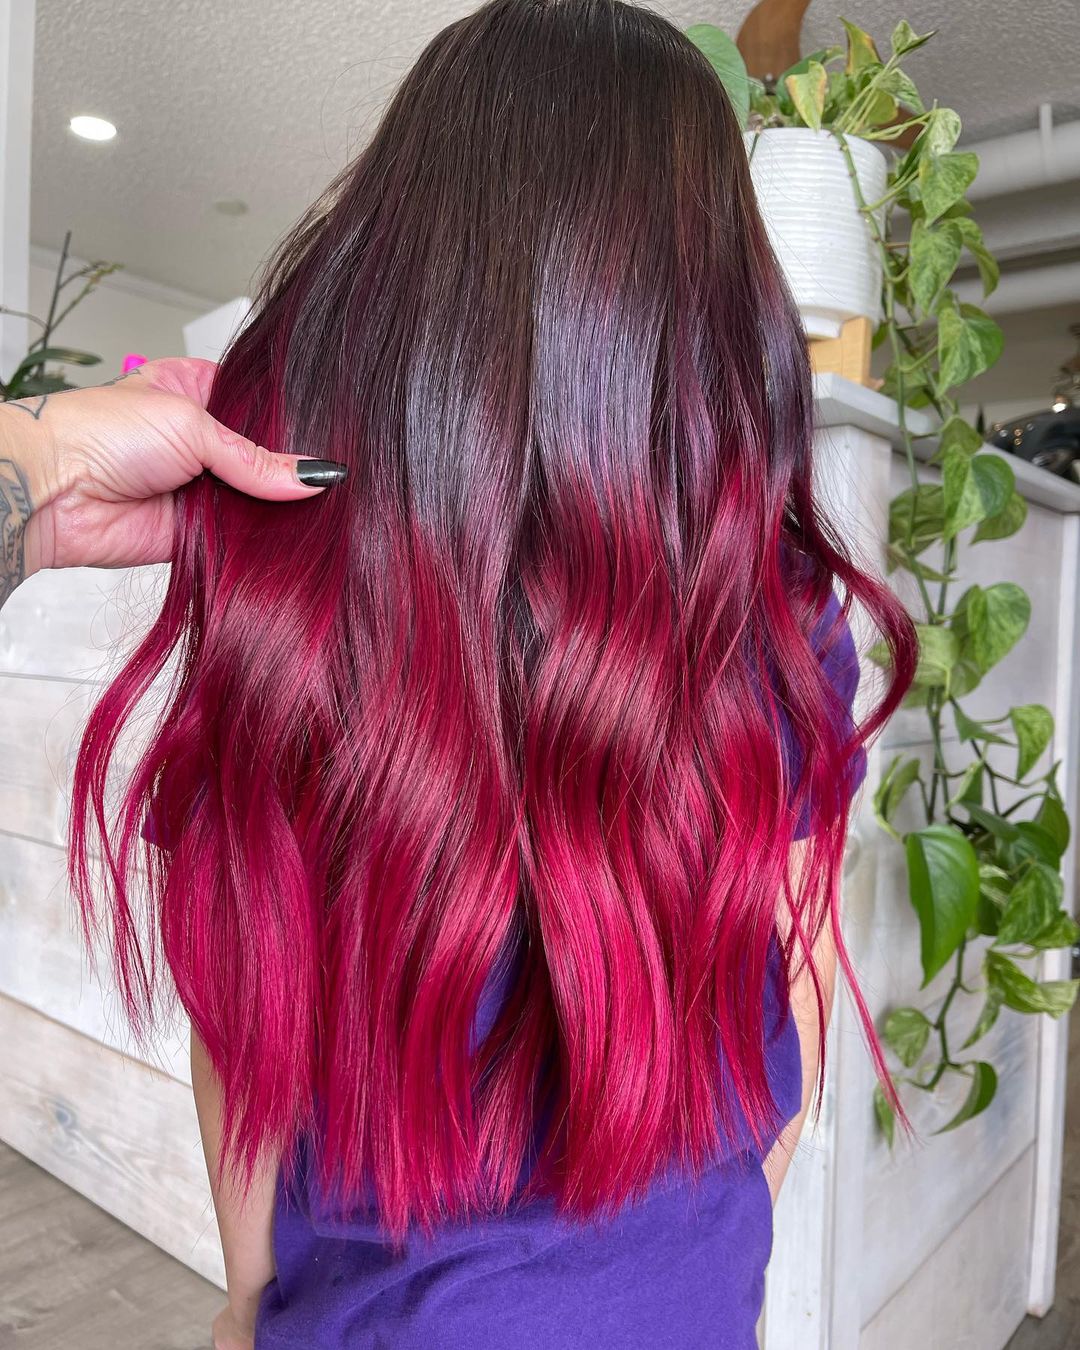 pink ombre hair color 133 Ombre pink hair blonde | Pastel pink ombre hair | Pink balayage Hair Pink Ombre Hair Color for Women